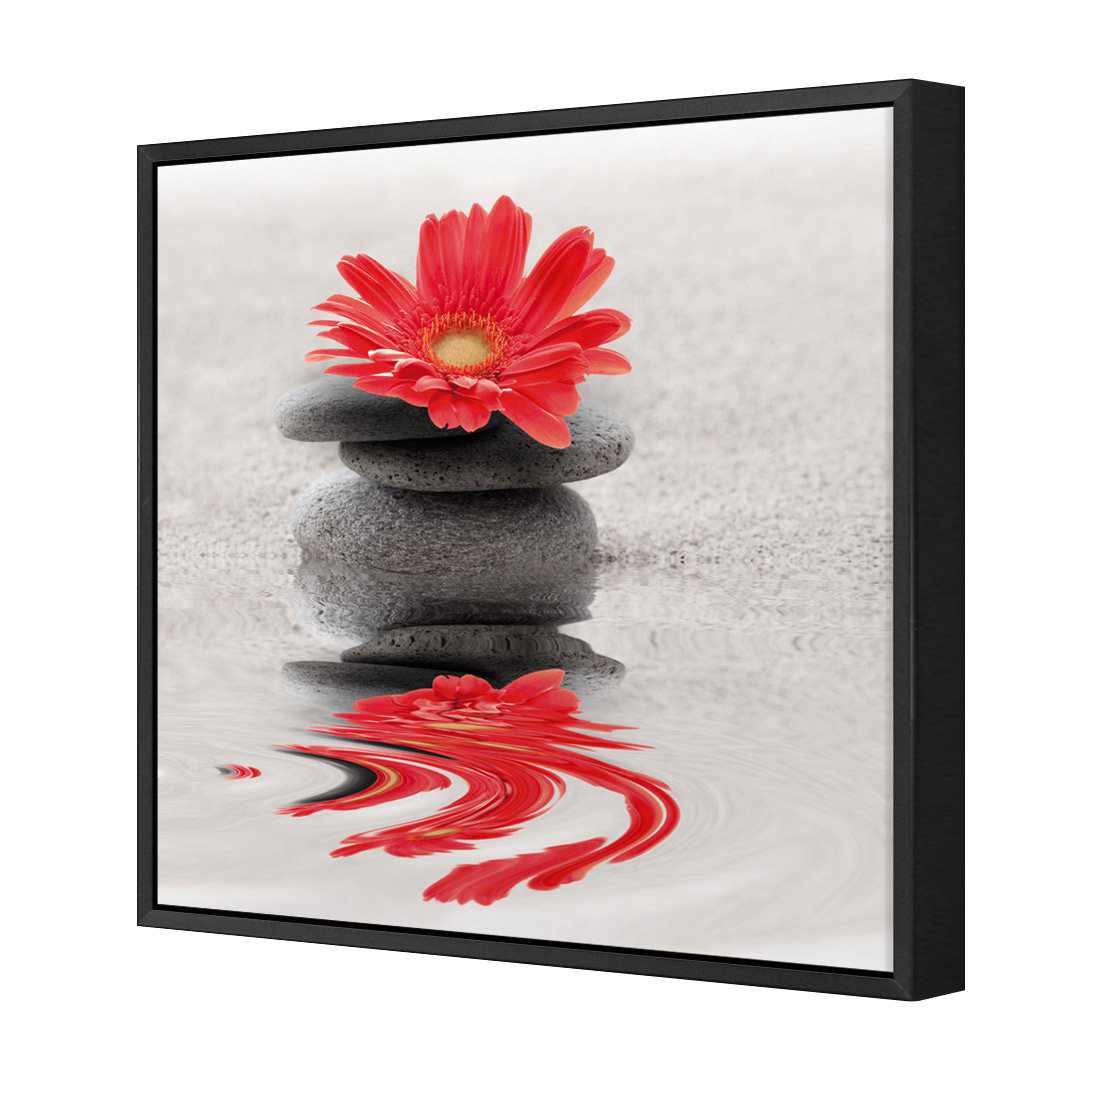 Red Flower Reflection Canvas Art-Canvas-Wall Art Designs-30x30cm-Canvas - Black Frame-Wall Art Designs